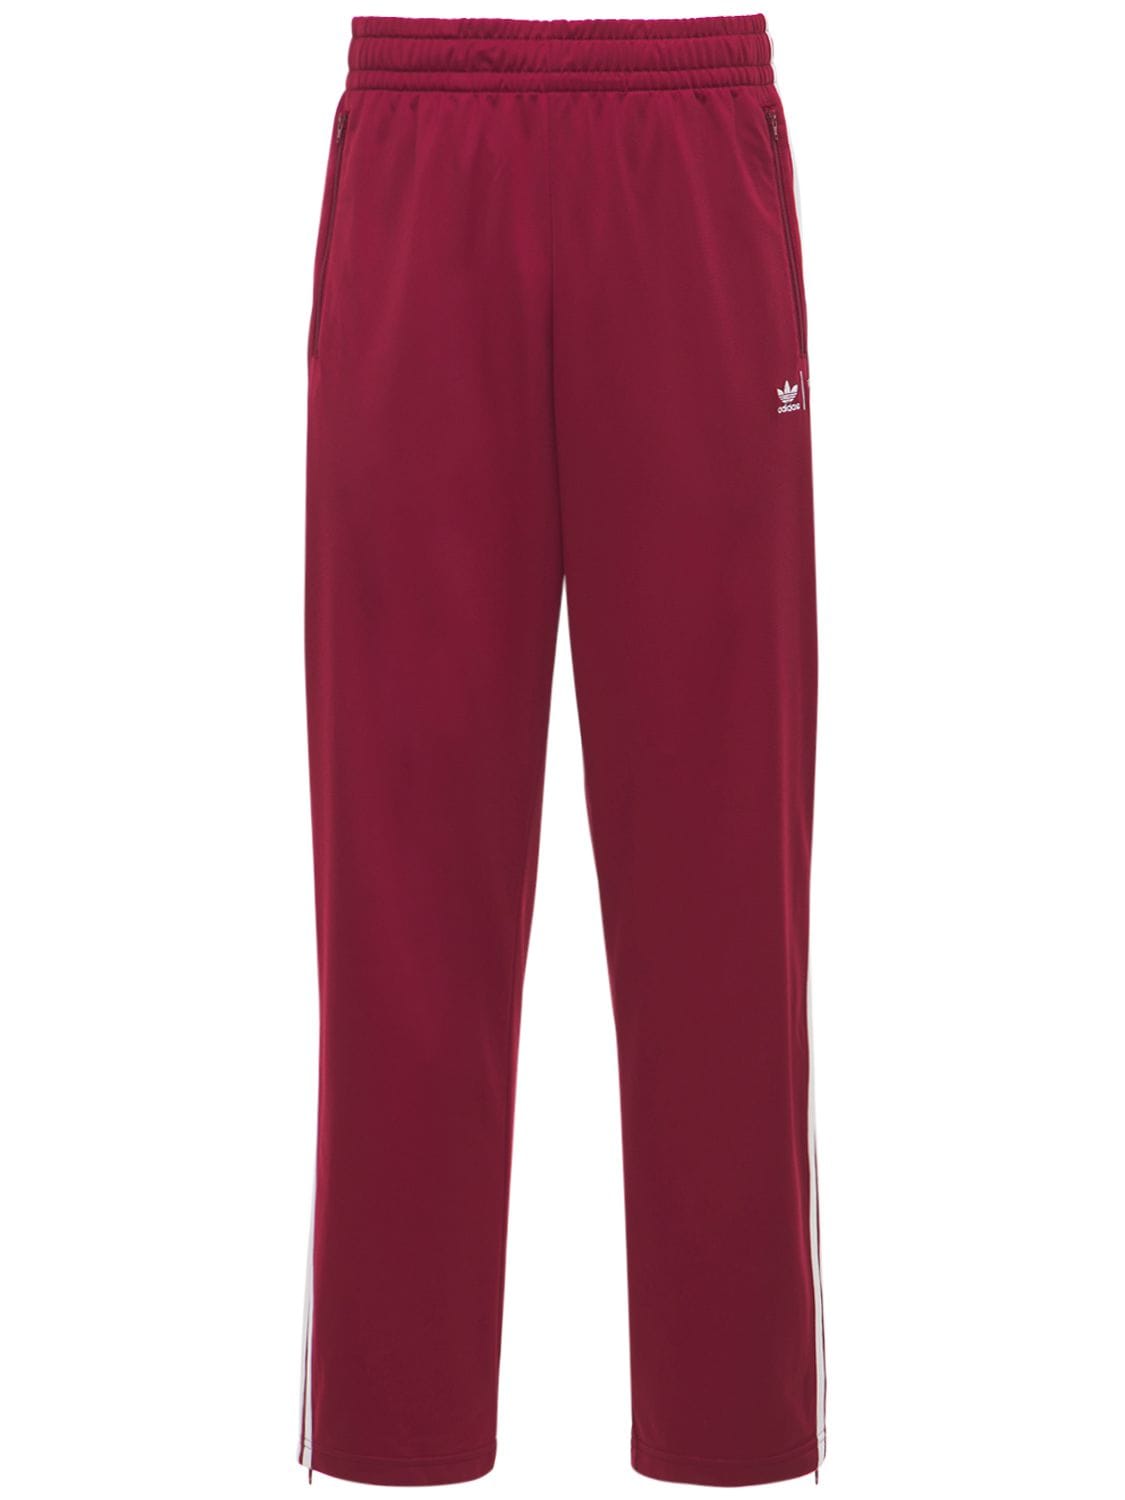 Adidas X Human Made Hm Reversible Firebird Track Pants In Bordeaux